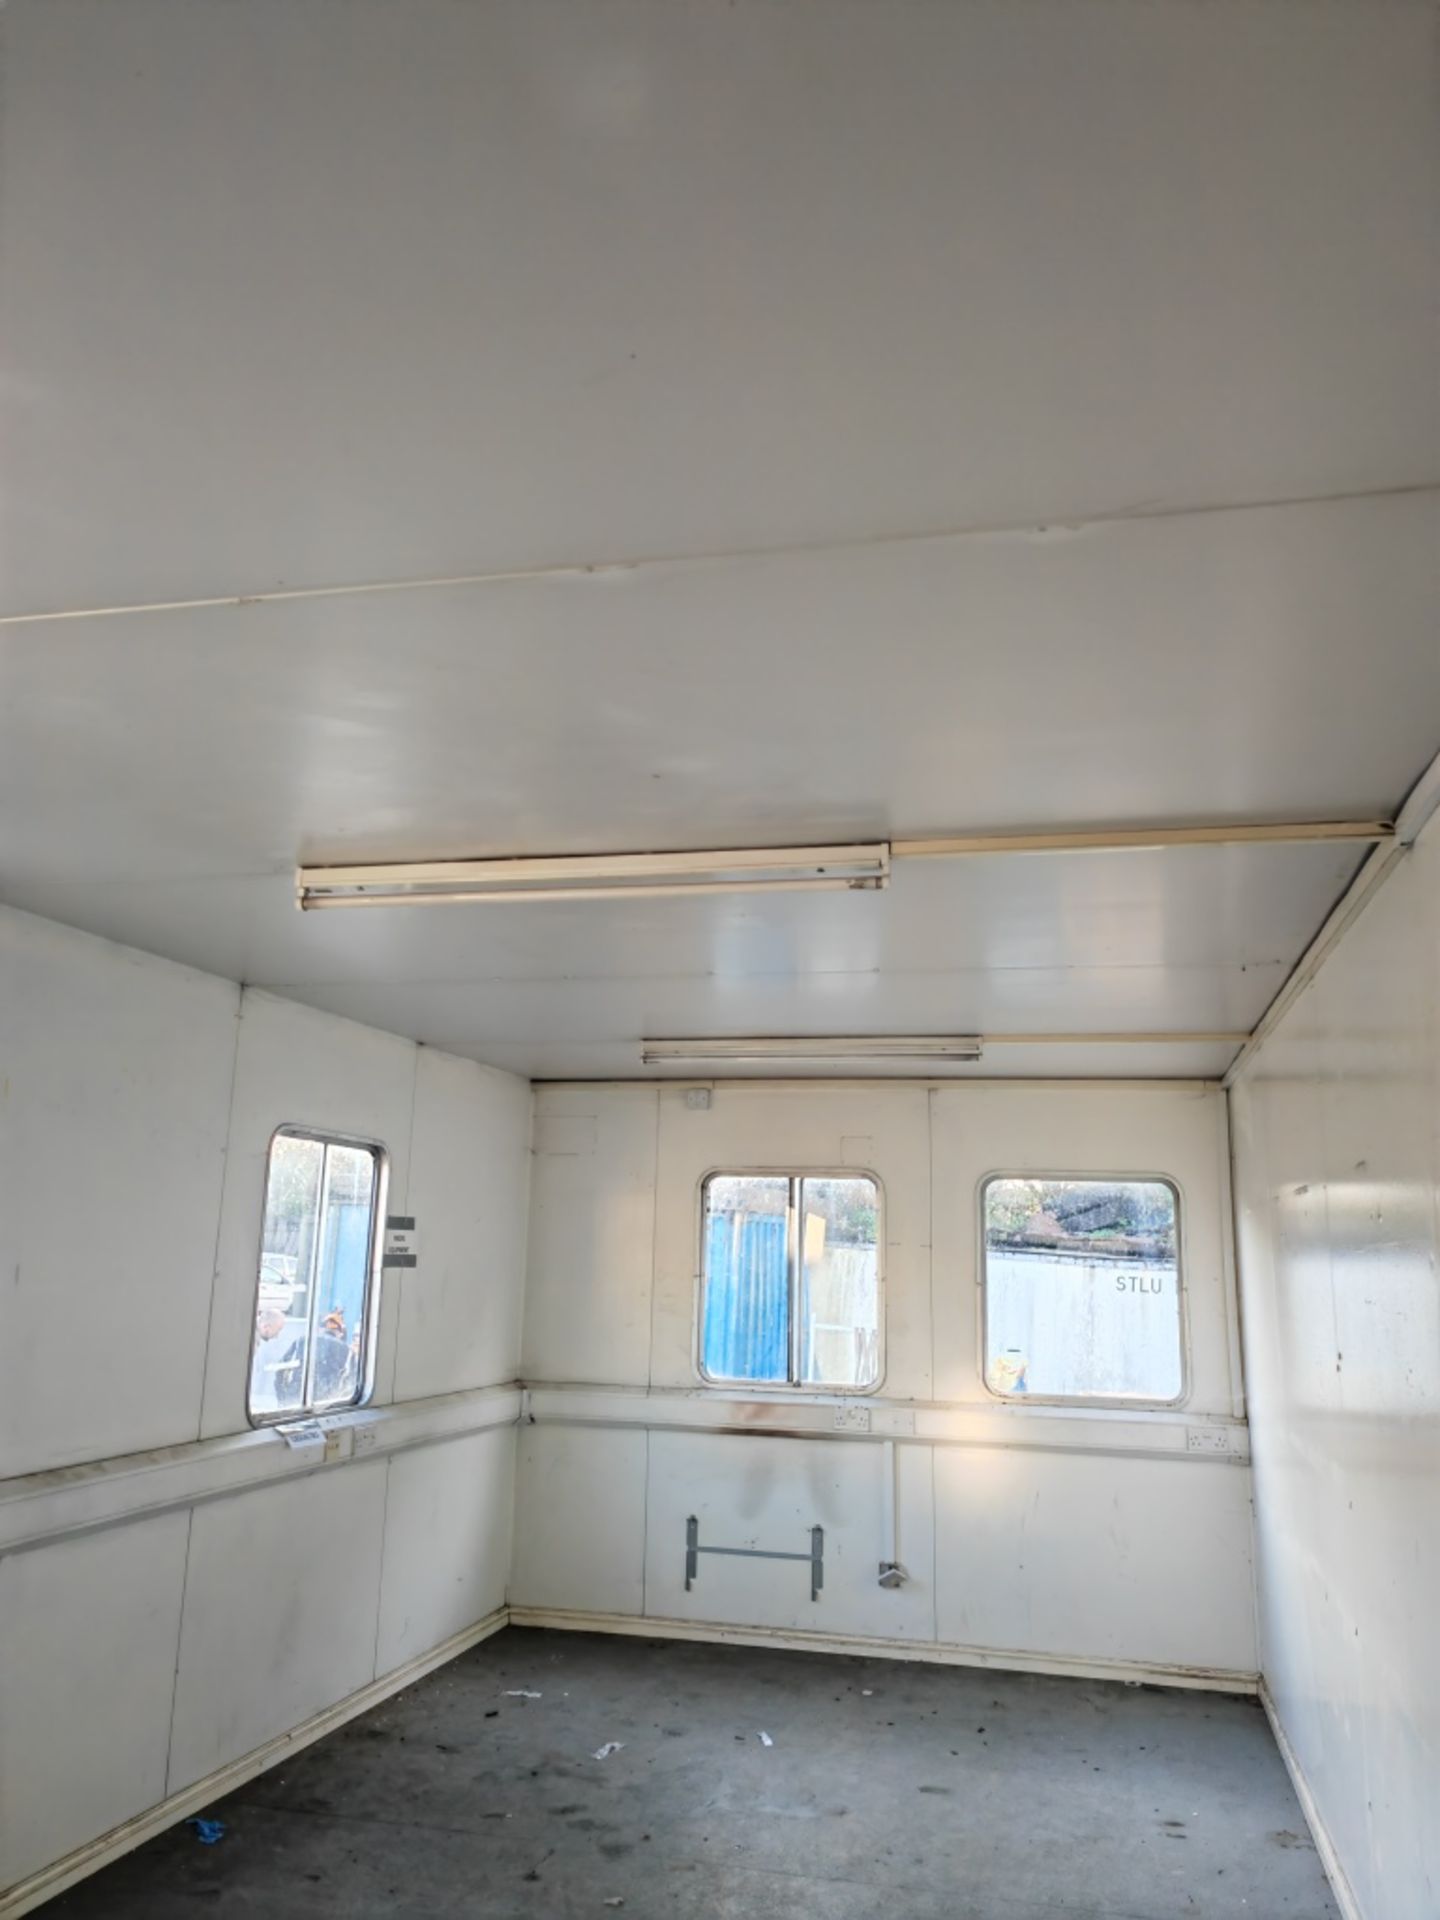 32ft x 10ft jack leg cabin. Collection from near W - Image 5 of 10